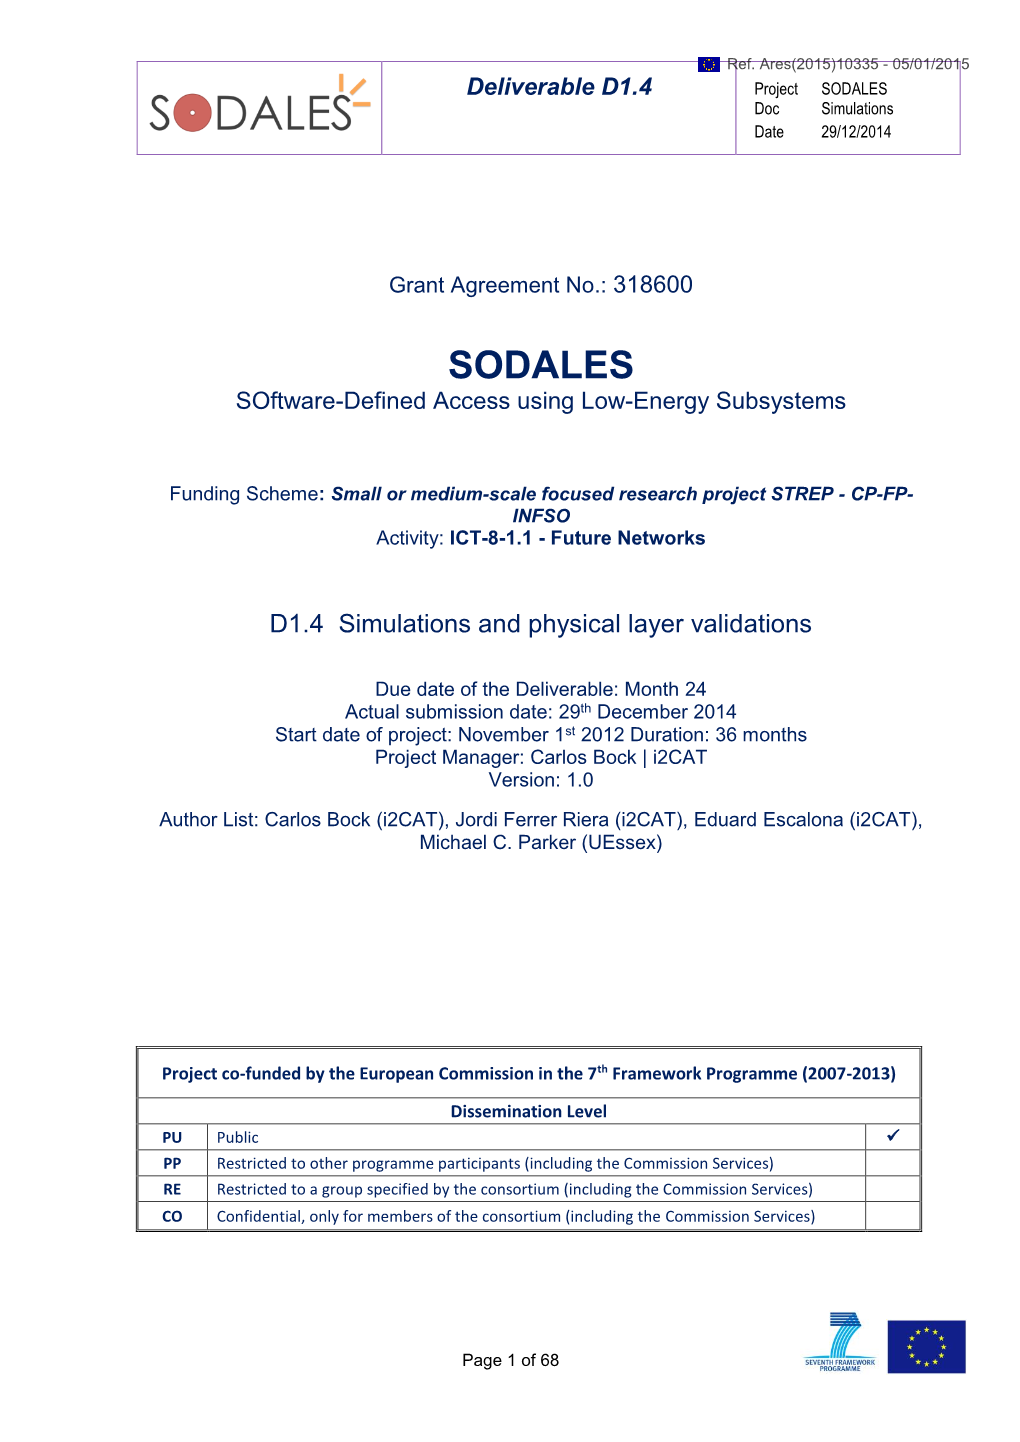 Deliverable 1.4 SODALES Simulations